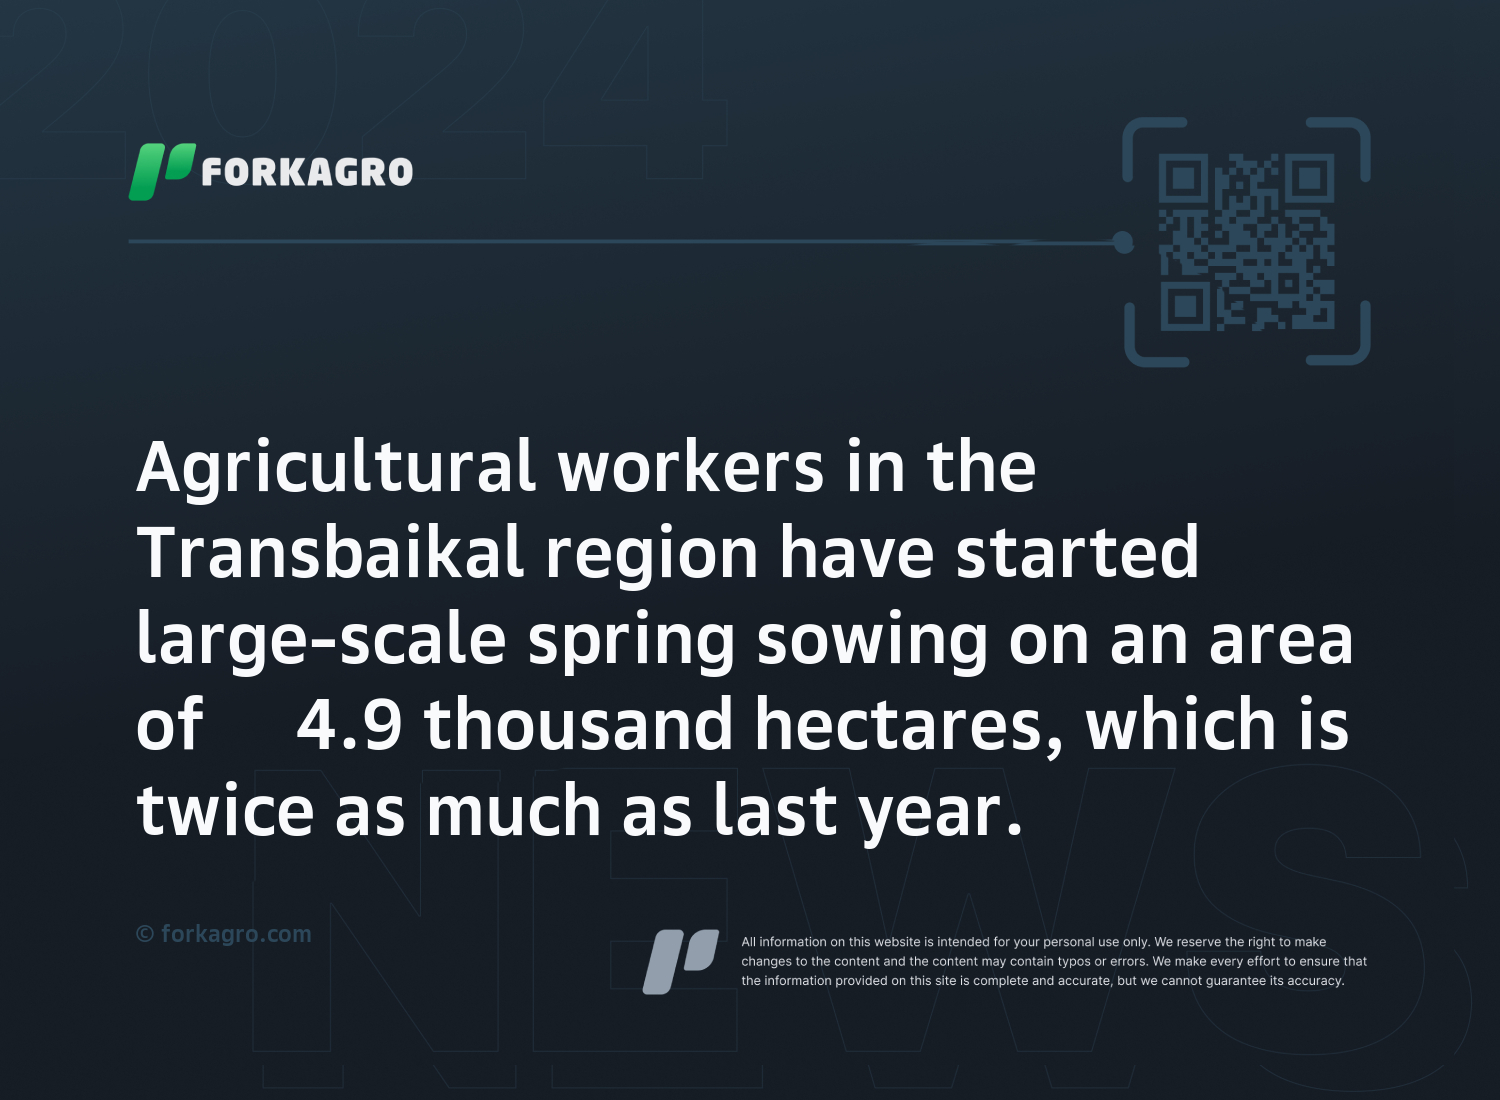 Agricultural workers in the Transbaikal region have started large-scale spring sowing on an area of ​​4.9 thousand hectares, which is twice as much as last year.